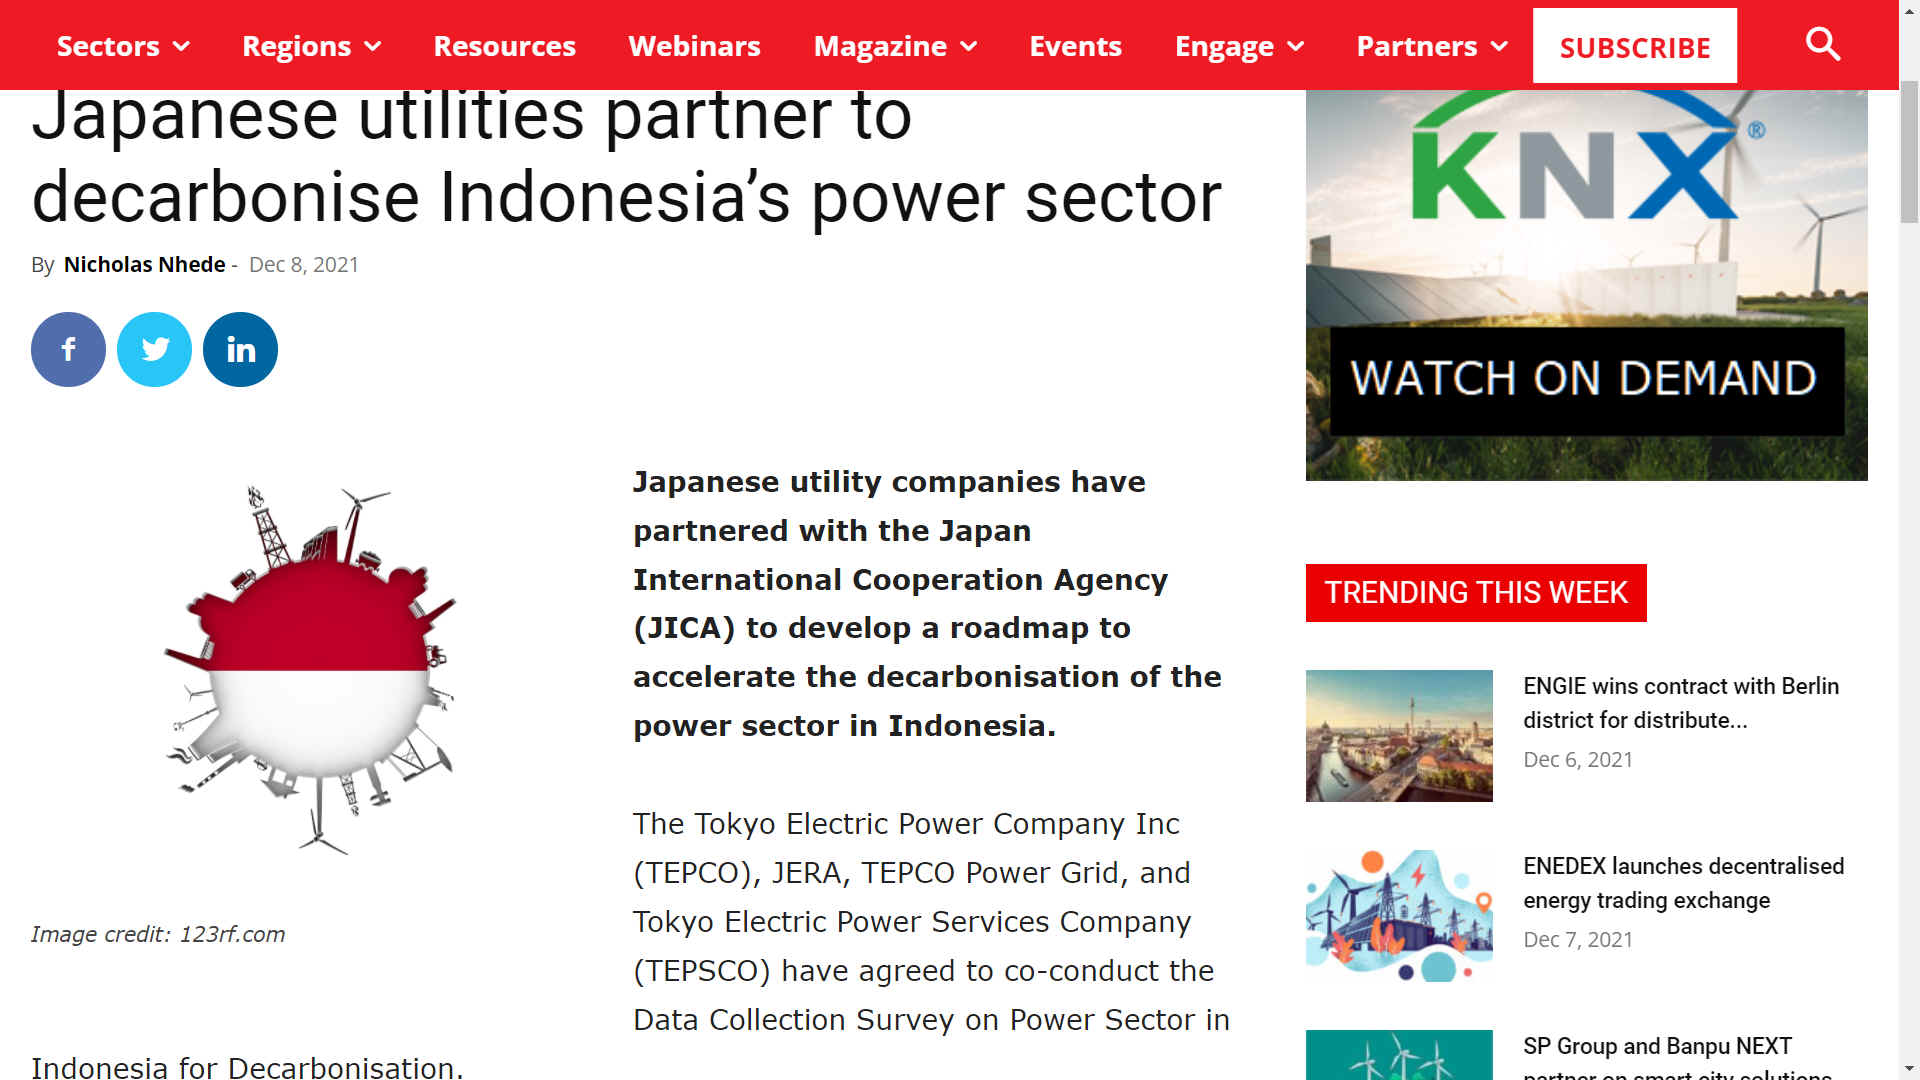 Japanese utilities to help Indonesia decarbonise their power sector